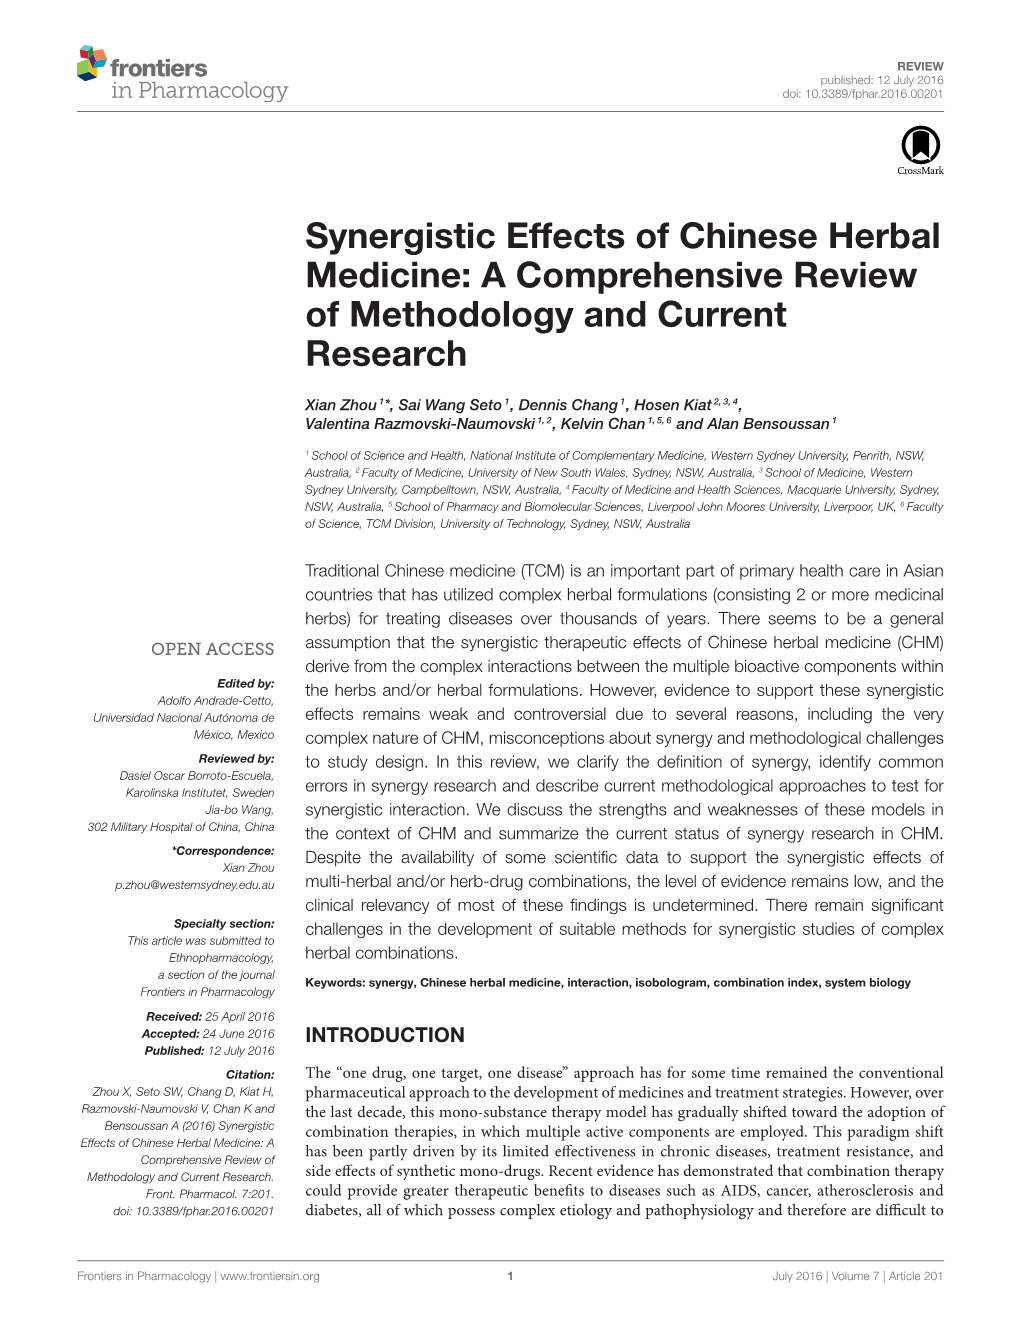 Synergistic Effects of Chinese Herbal Medicine: a Comprehensive Review of Methodology and Current Research